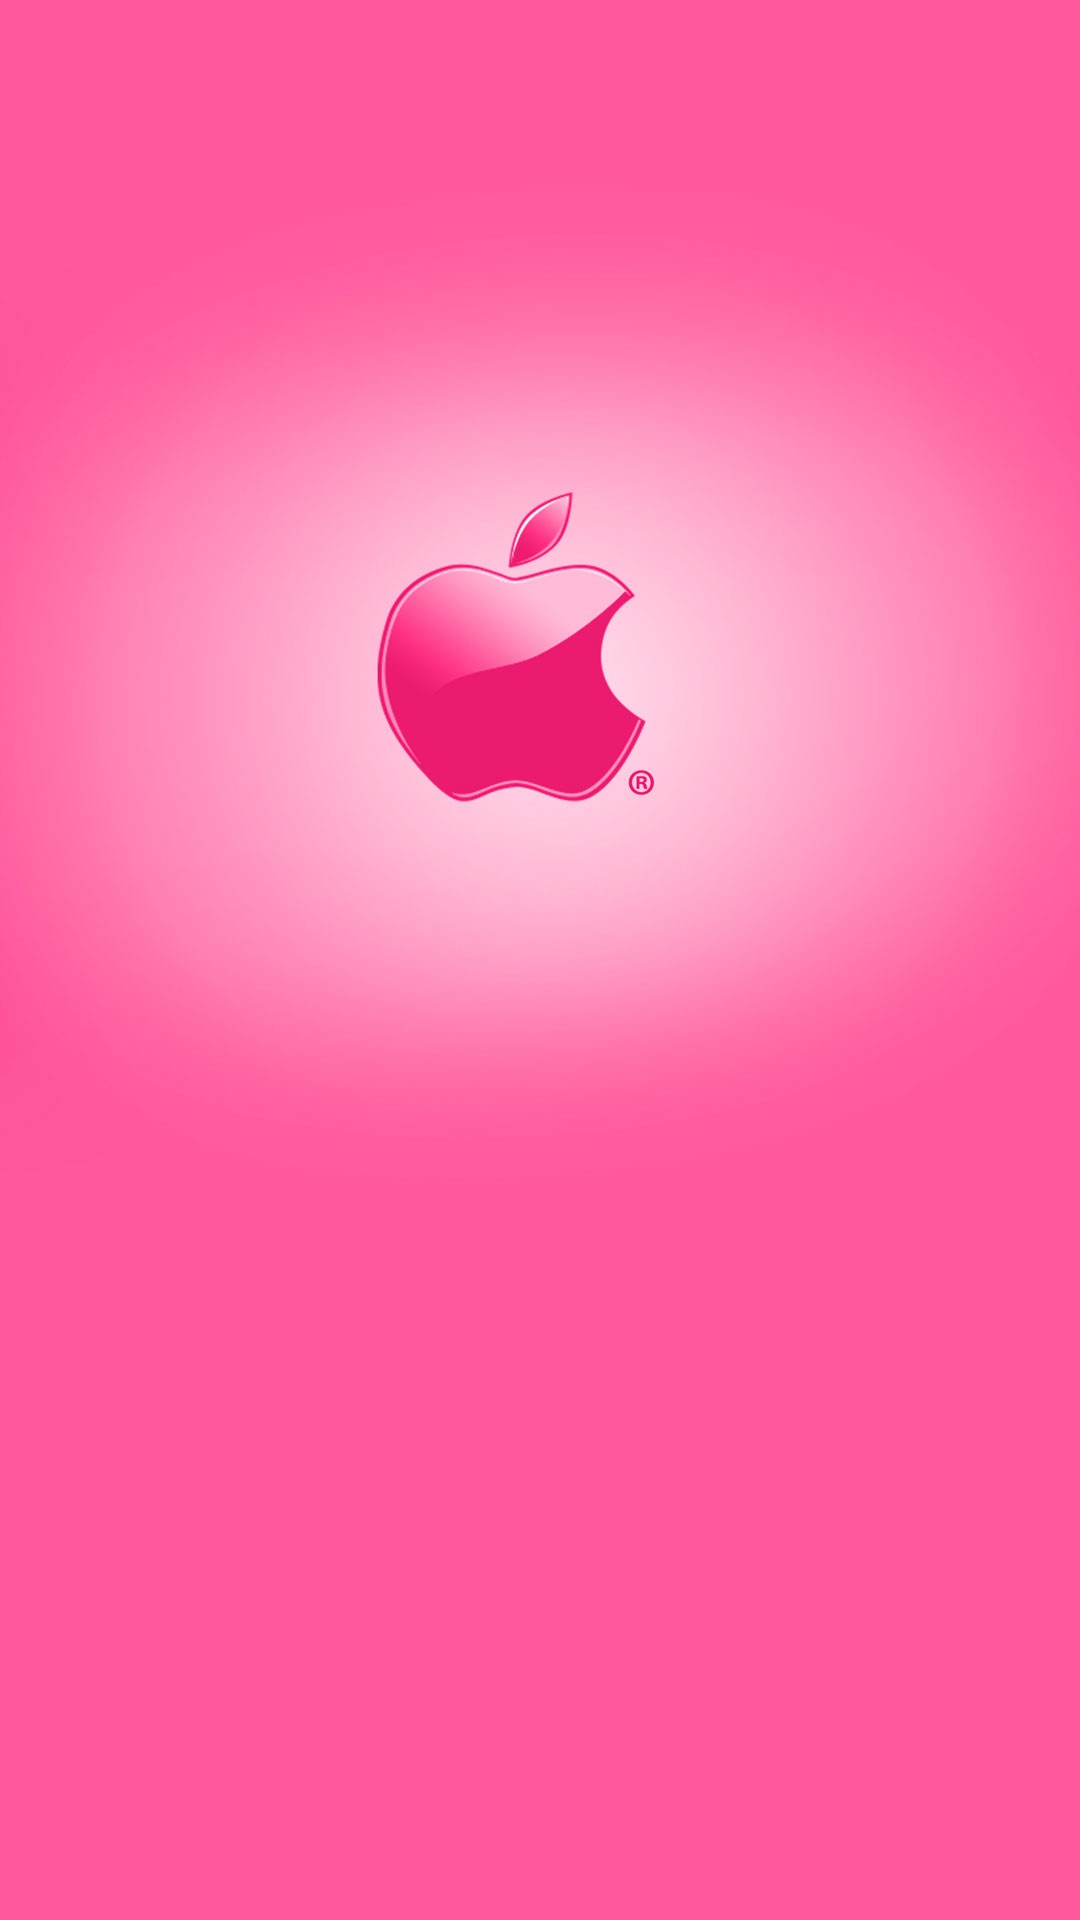 Pink Apple Wallpaper For Android with HD resolution 1080x1920